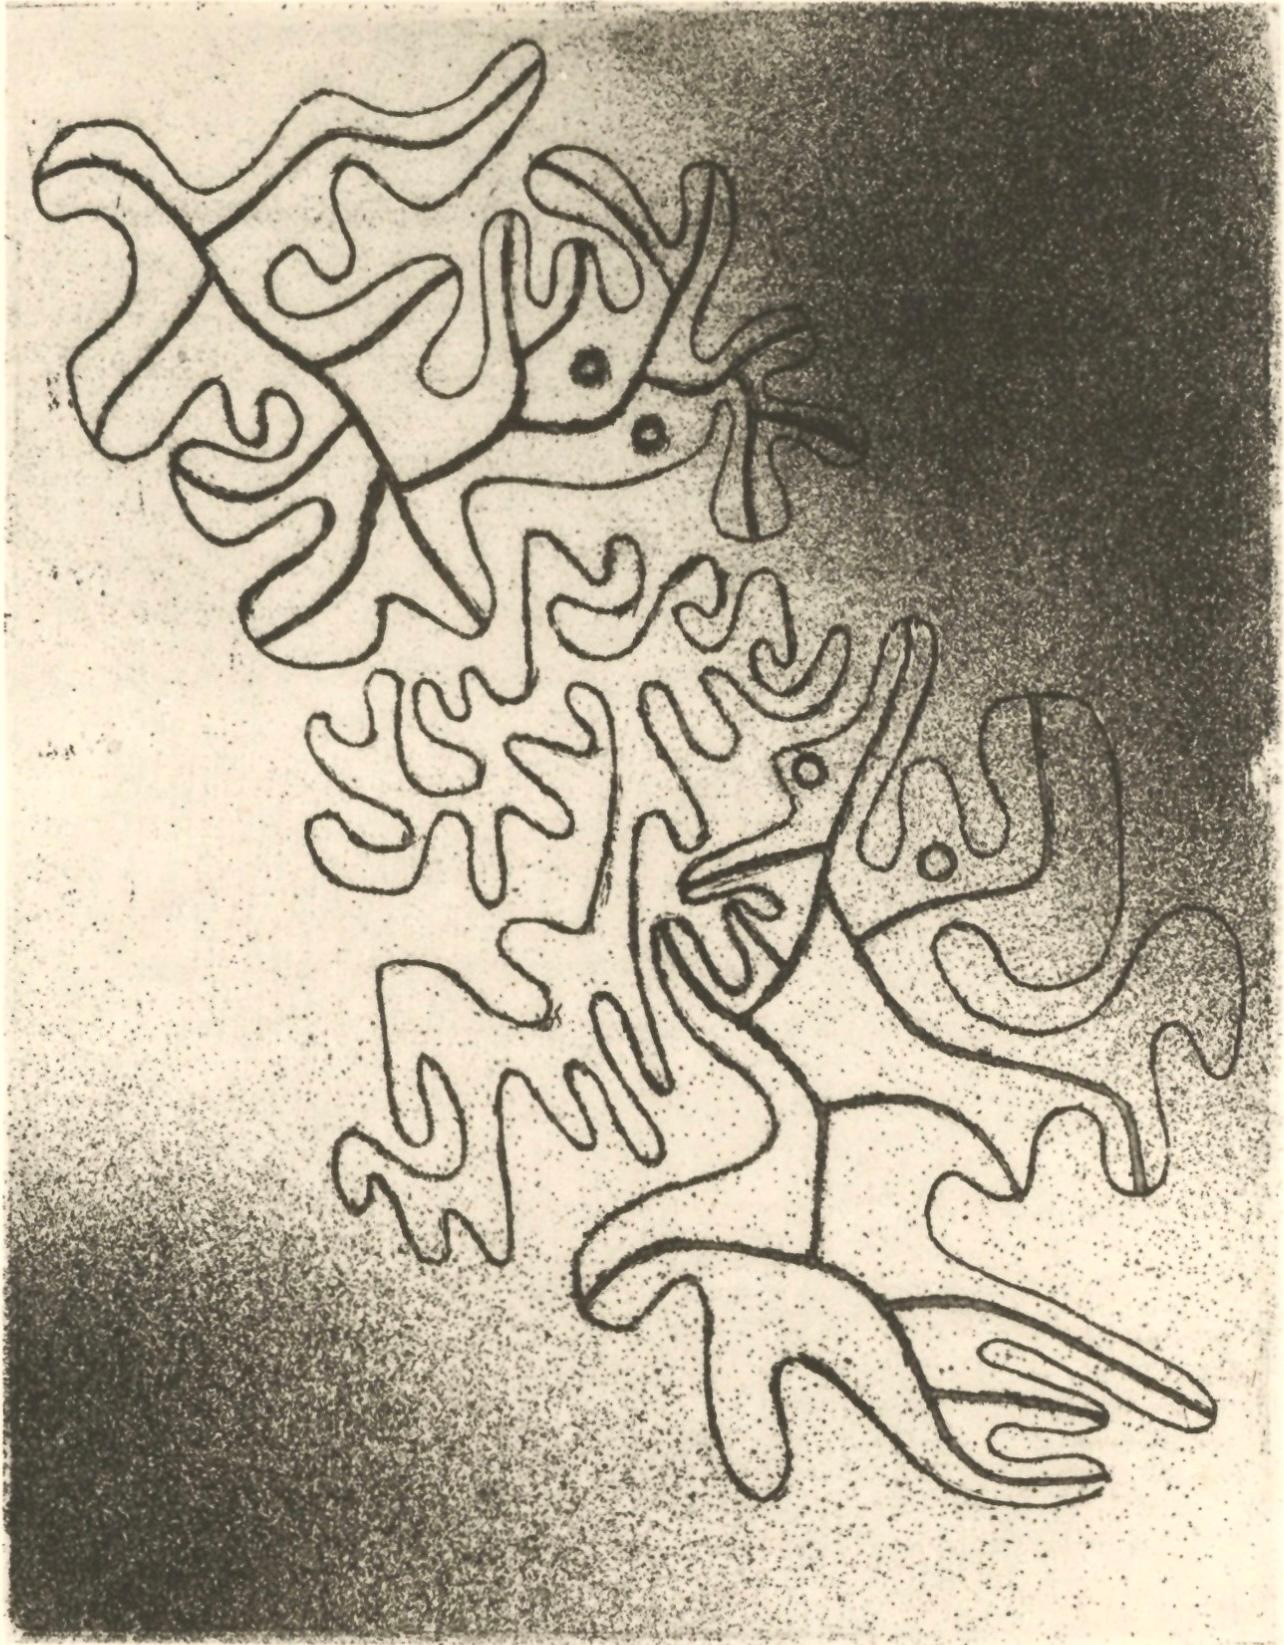 Etching on vélin paper. Inscription: Unsigned and unnumbered. Good condition. Notes: From the folio, Prints of Paul Klee, 1945. Published by the Museum of Modern Art, New York and Curt Valentin, New York; printed by Meriden Gravure Company, Meriden,